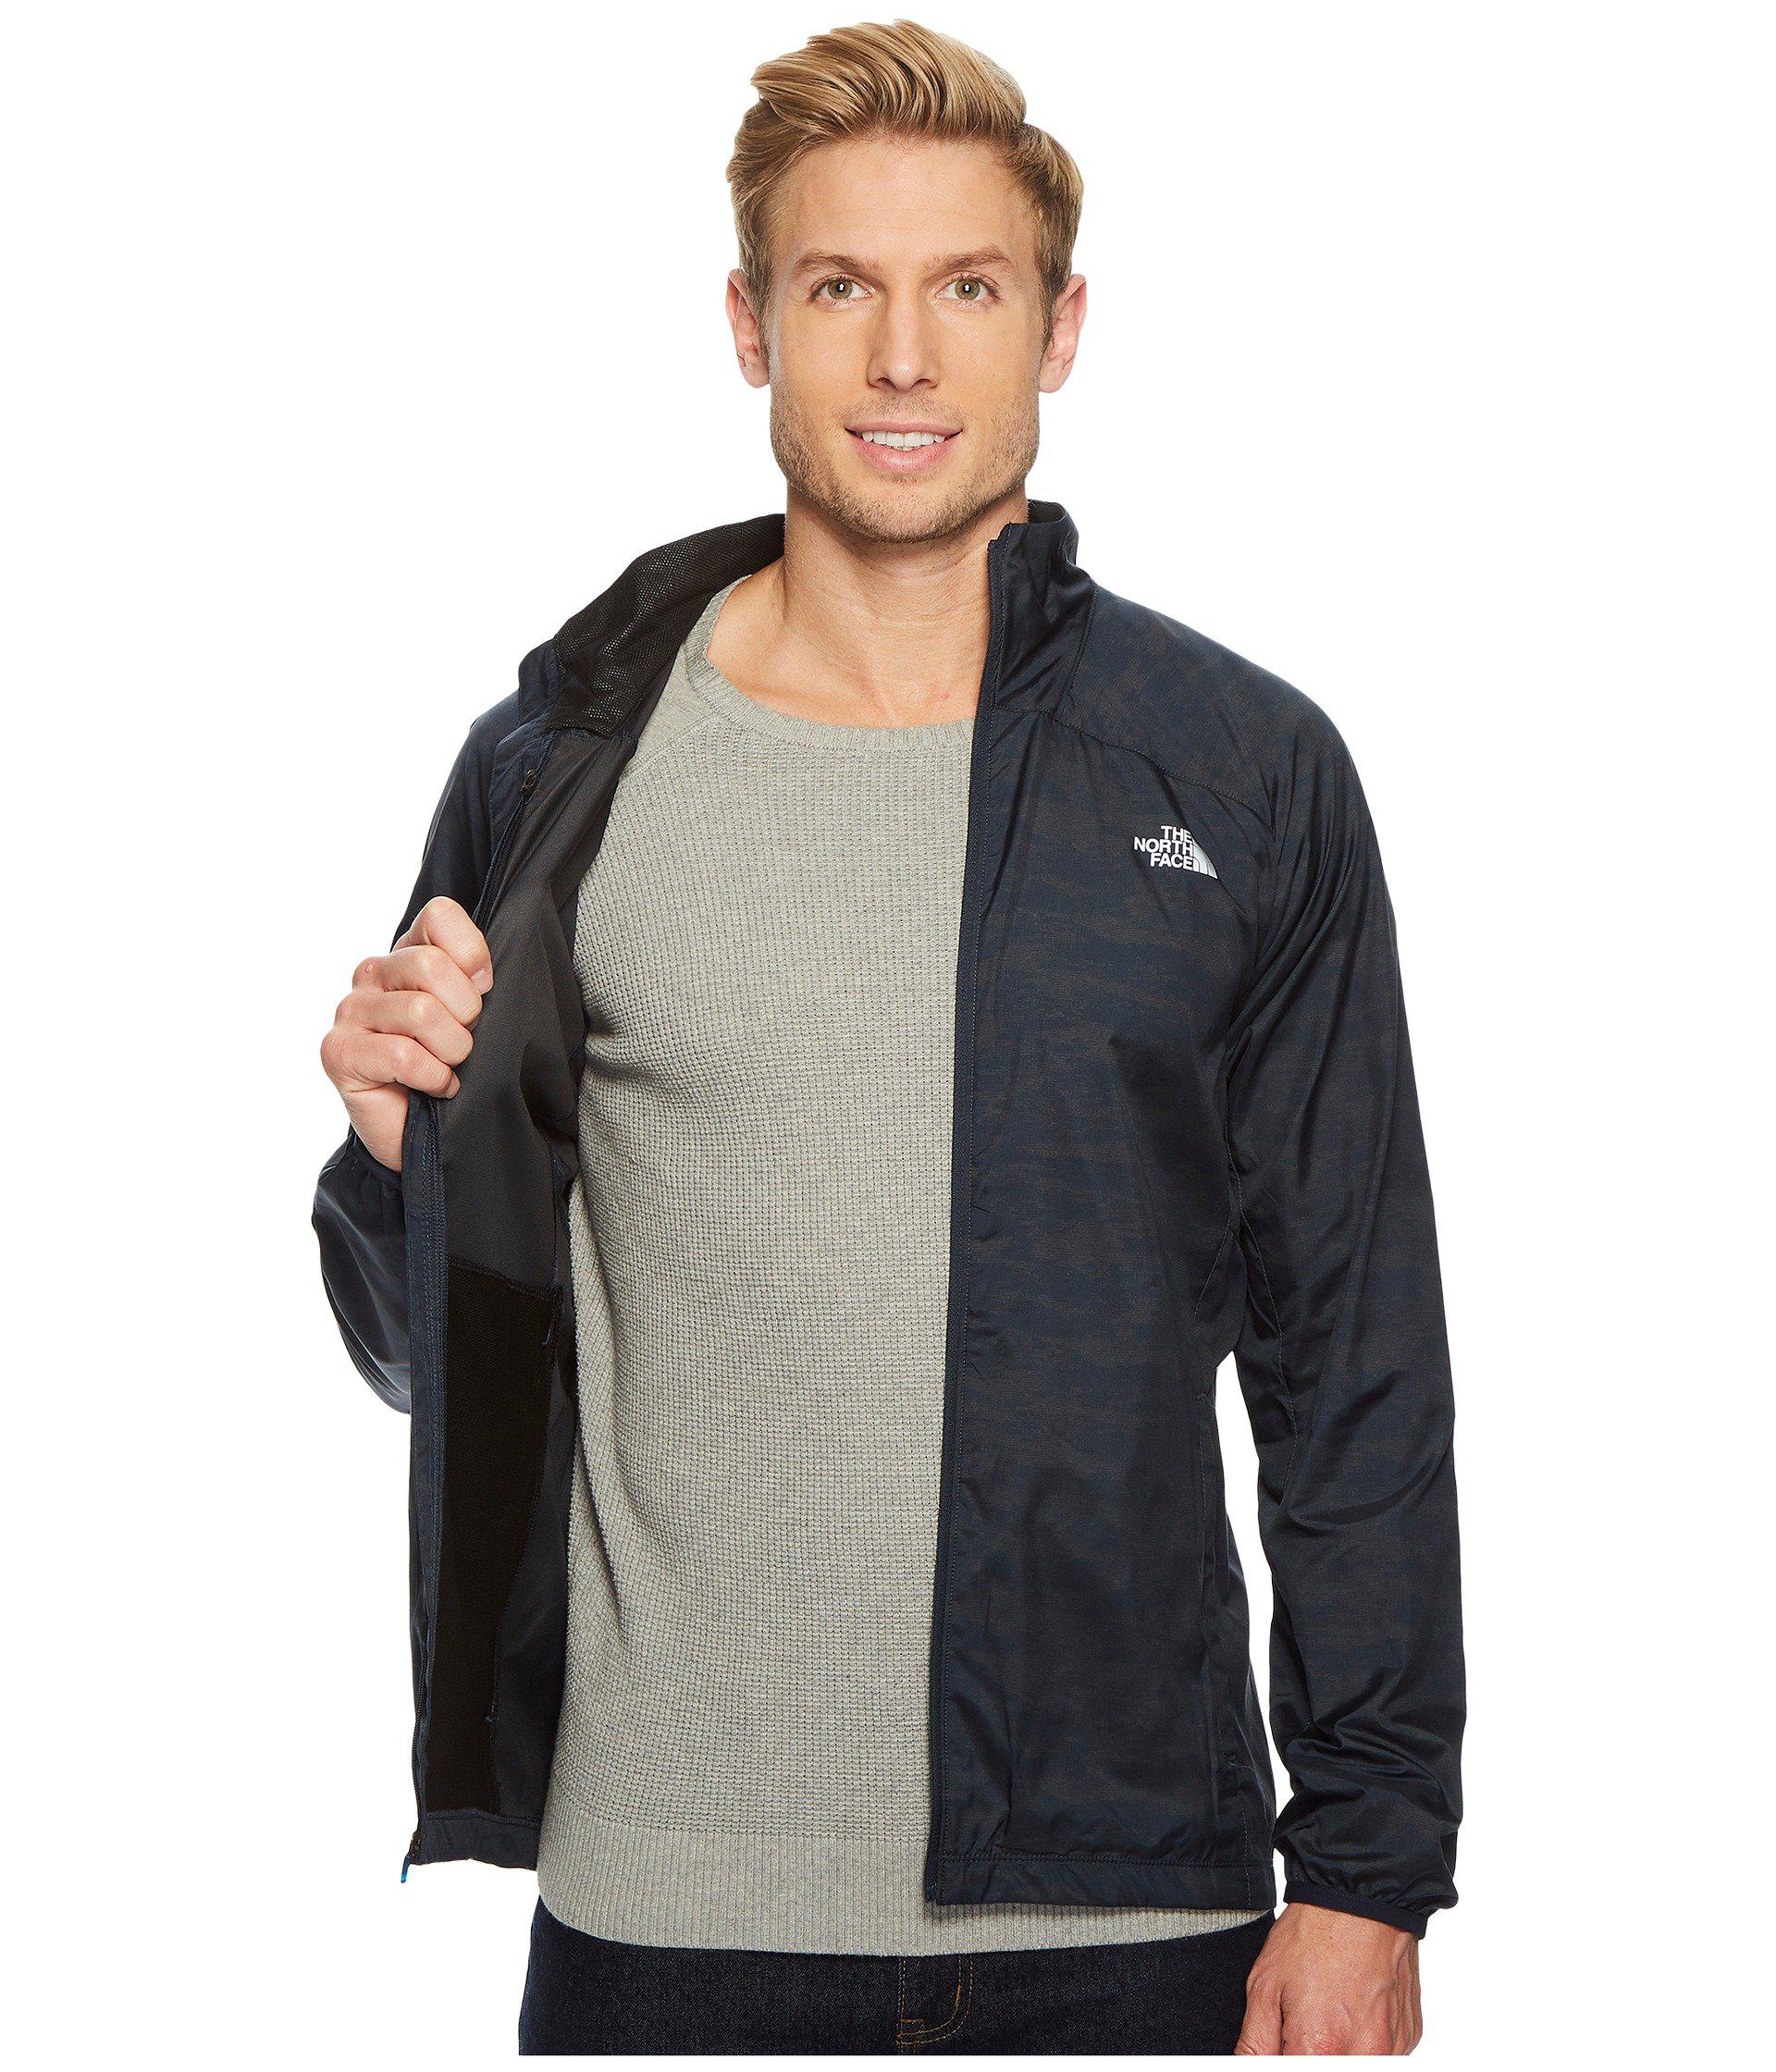 North Face Ambition Jacket Flash Sales, 56% OFF | www.aboutfaceandbody.net